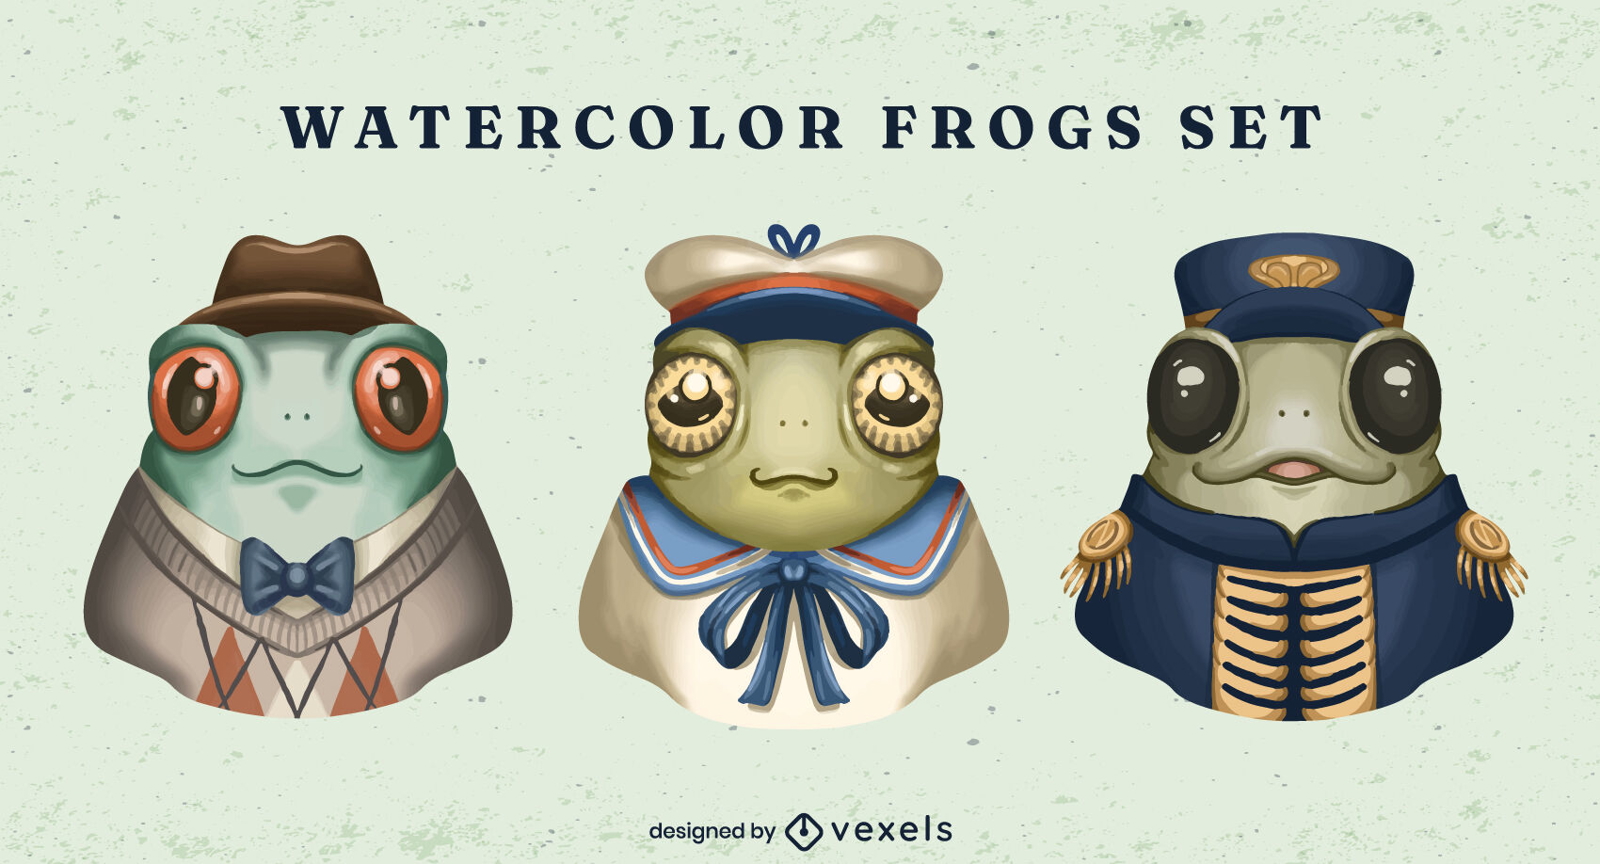 Cute frog animals as characters in watercolor